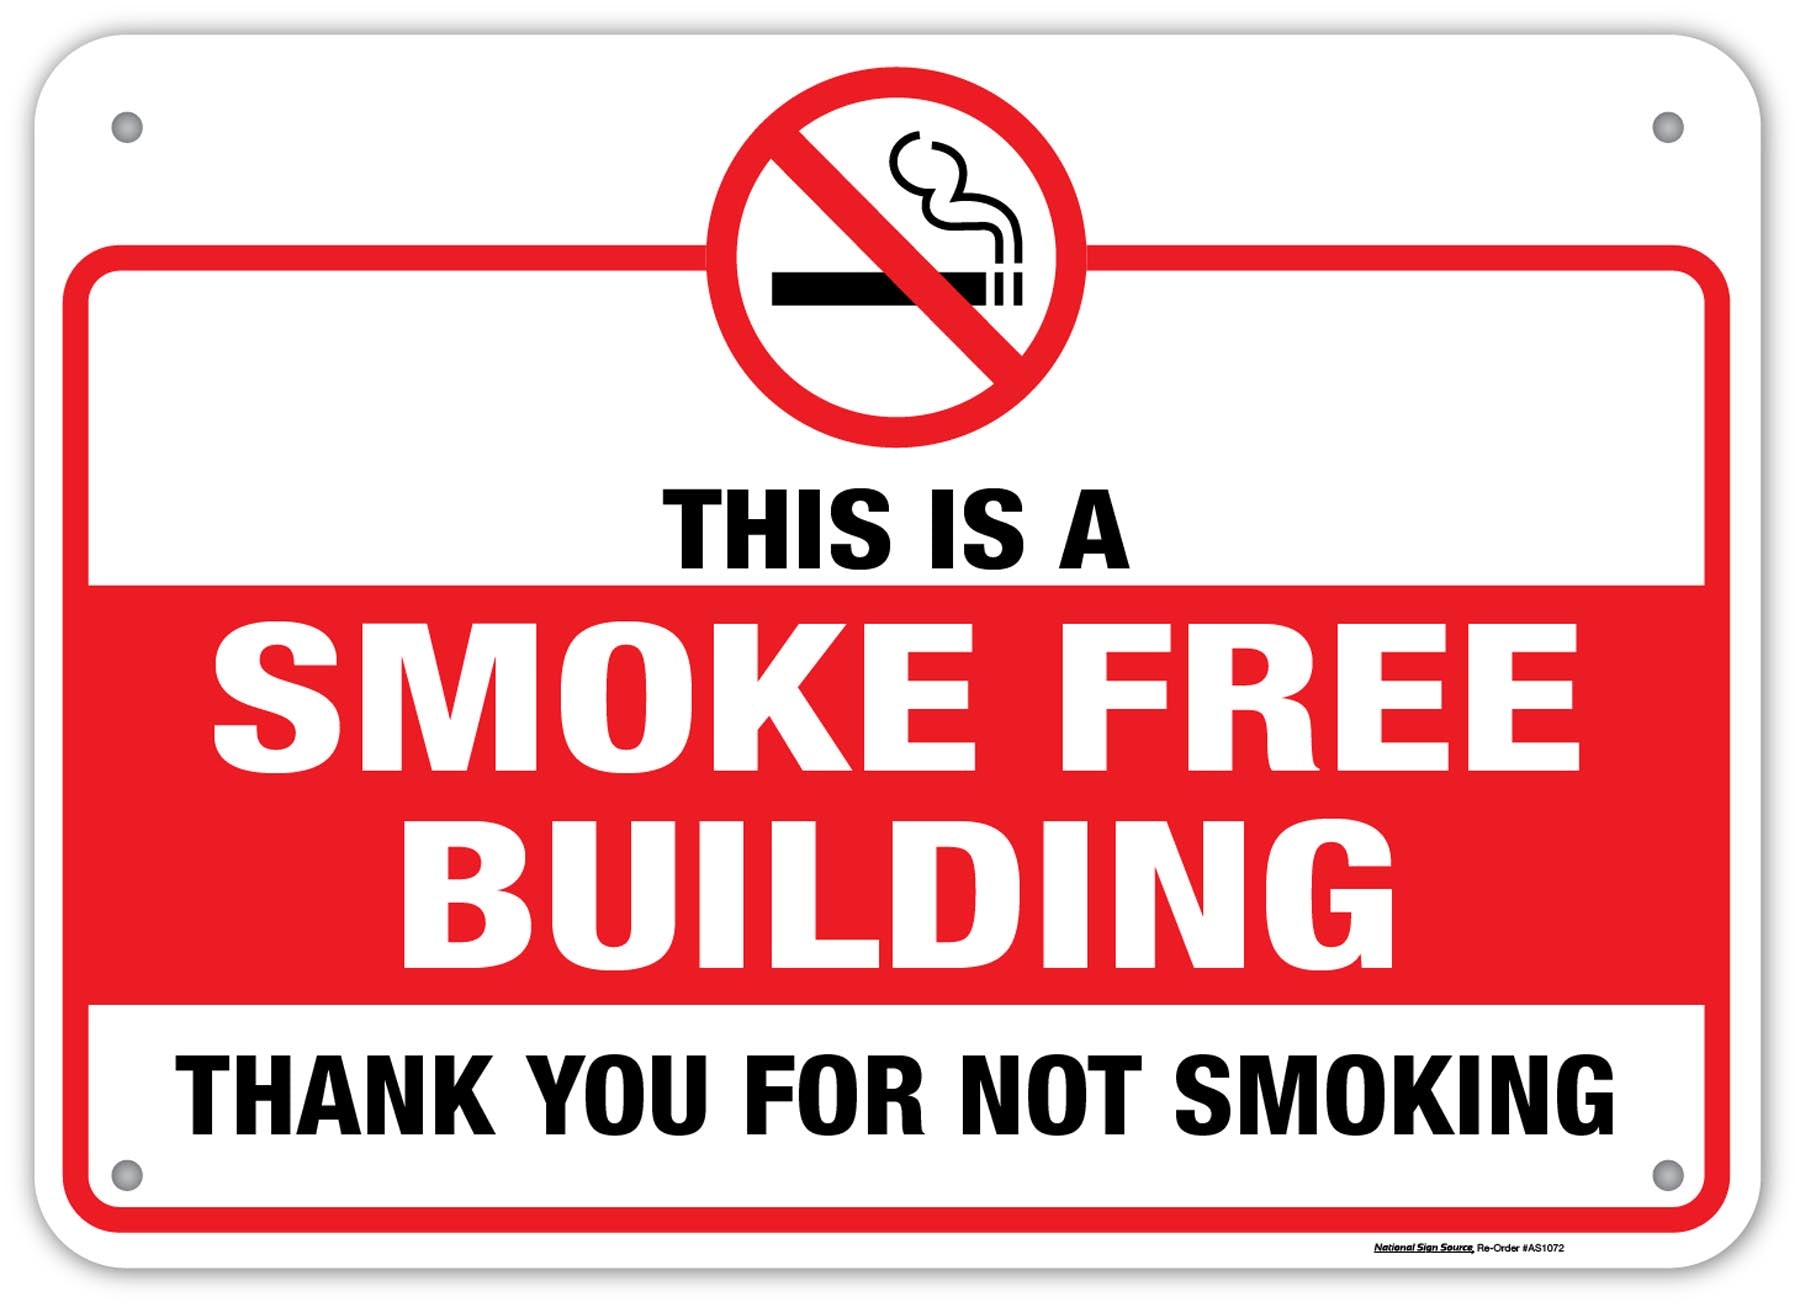 Smoke Free Building signs. Aluminum sign or Vinyl decal available. Sign features a small no smoking symbol and reads "This is a Smoke free building. Thank you for not smoking."